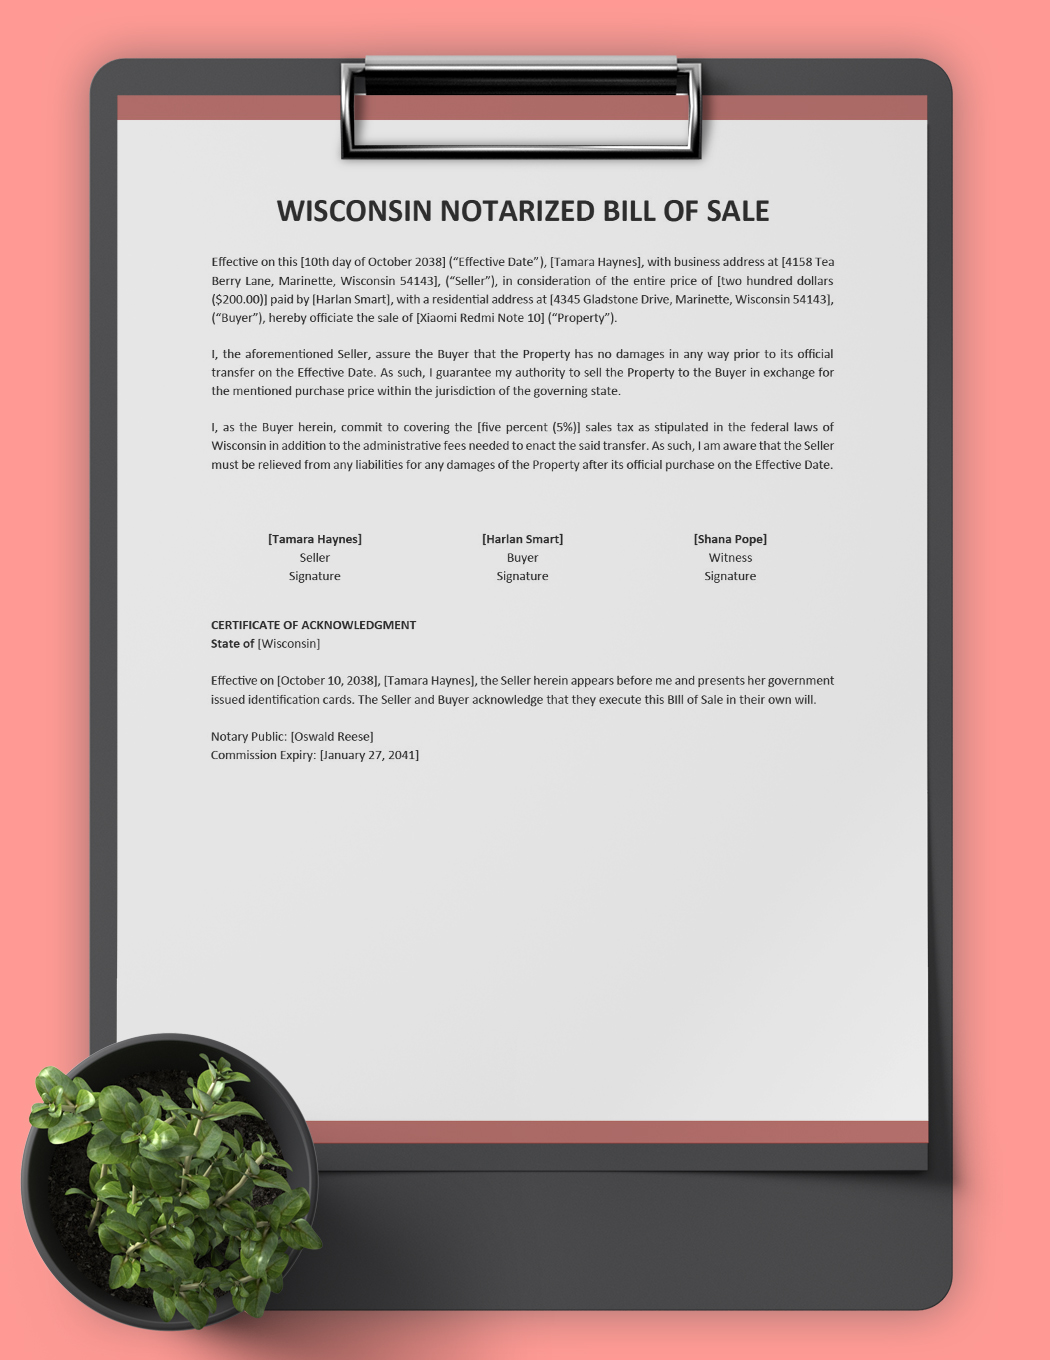 Wisconsin Notarized Bill of Sale Template